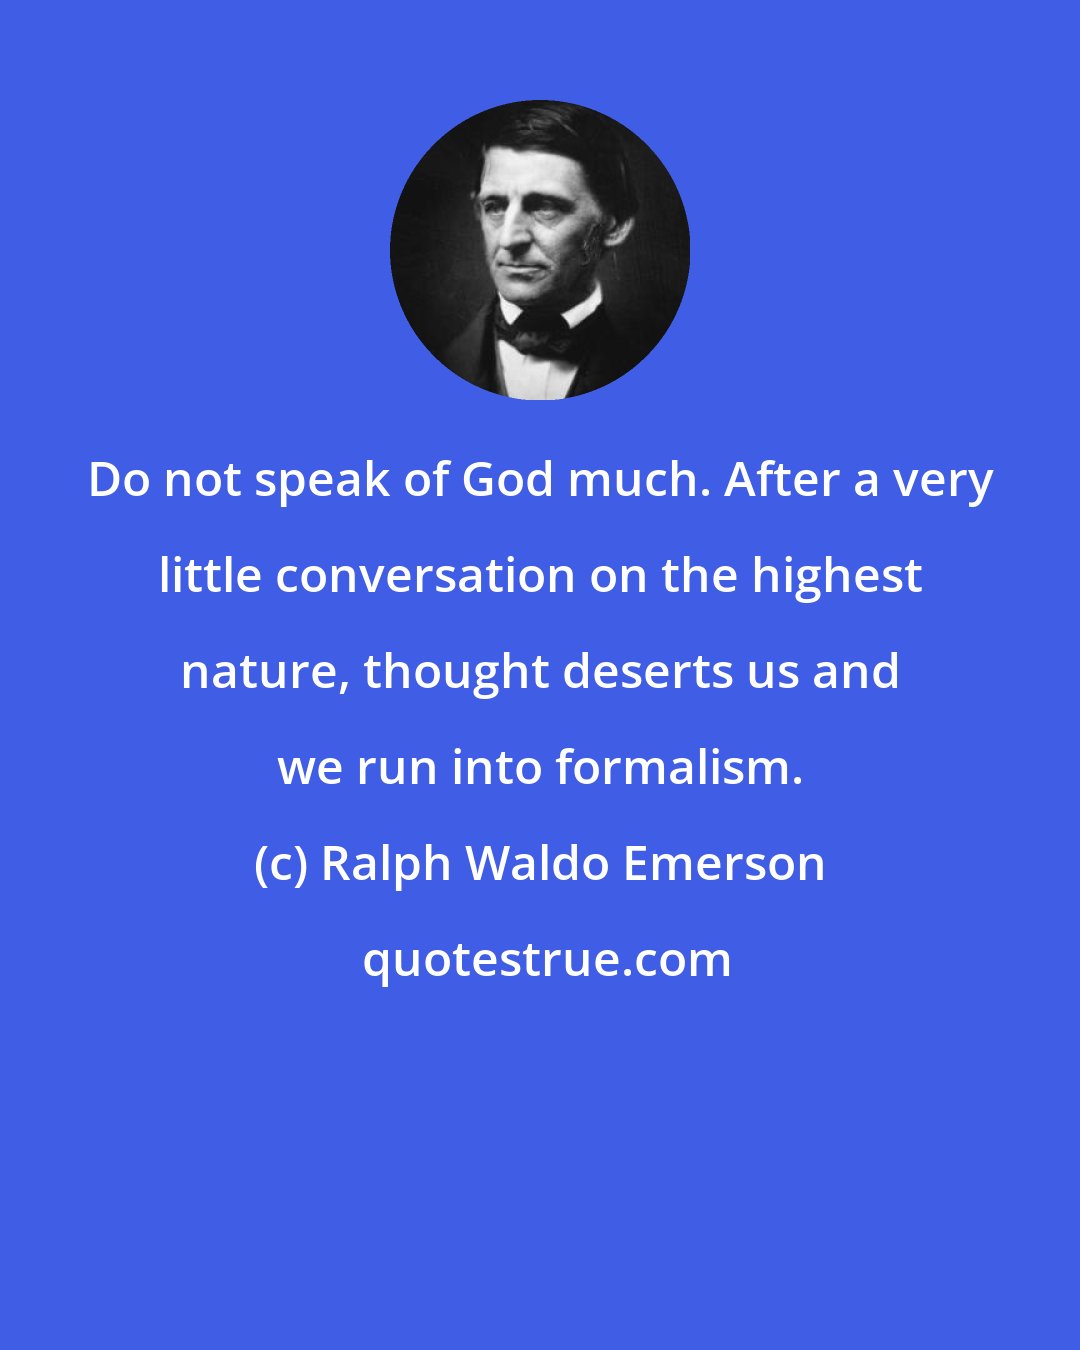 Ralph Waldo Emerson: Do not speak of God much. After a very little conversation on the highest nature, thought deserts us and we run into formalism.